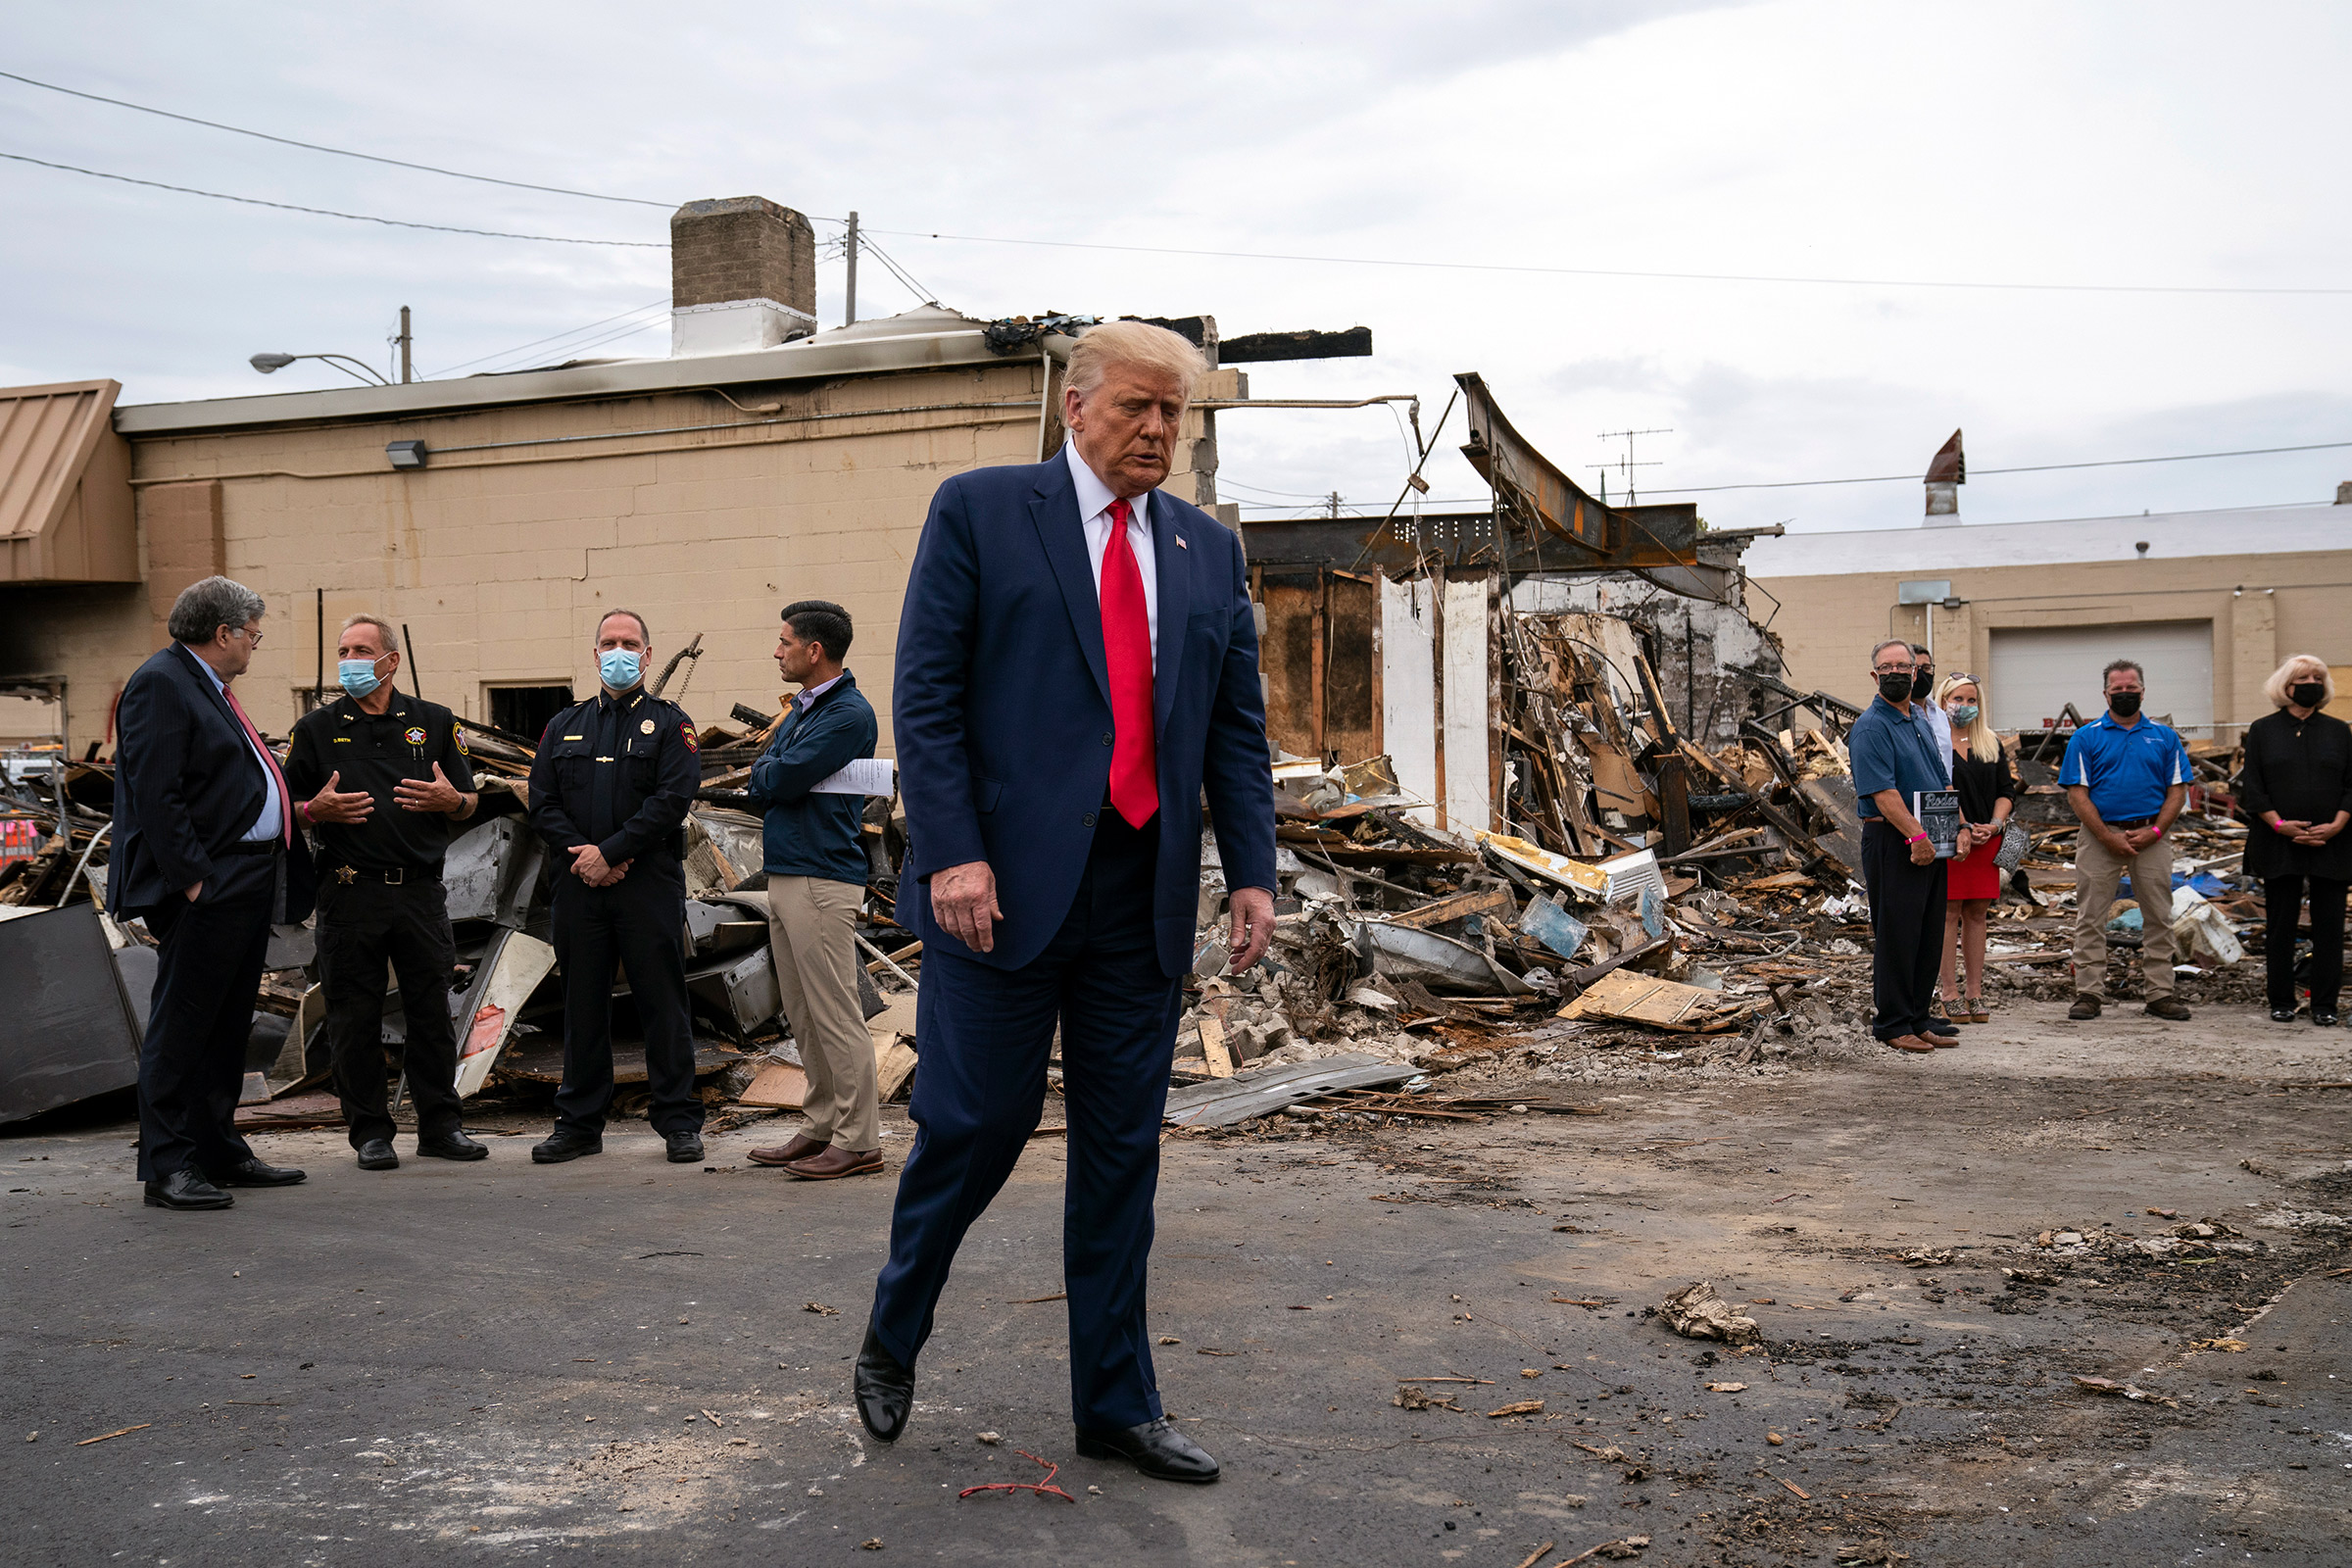 President Donald Trump tours an area Tuesday that was damaged during demonstrations after a police officer shot Jacob Blake in Kenosha, Wis., on Sept. 1, 2020. (Evan Vucci—AP)